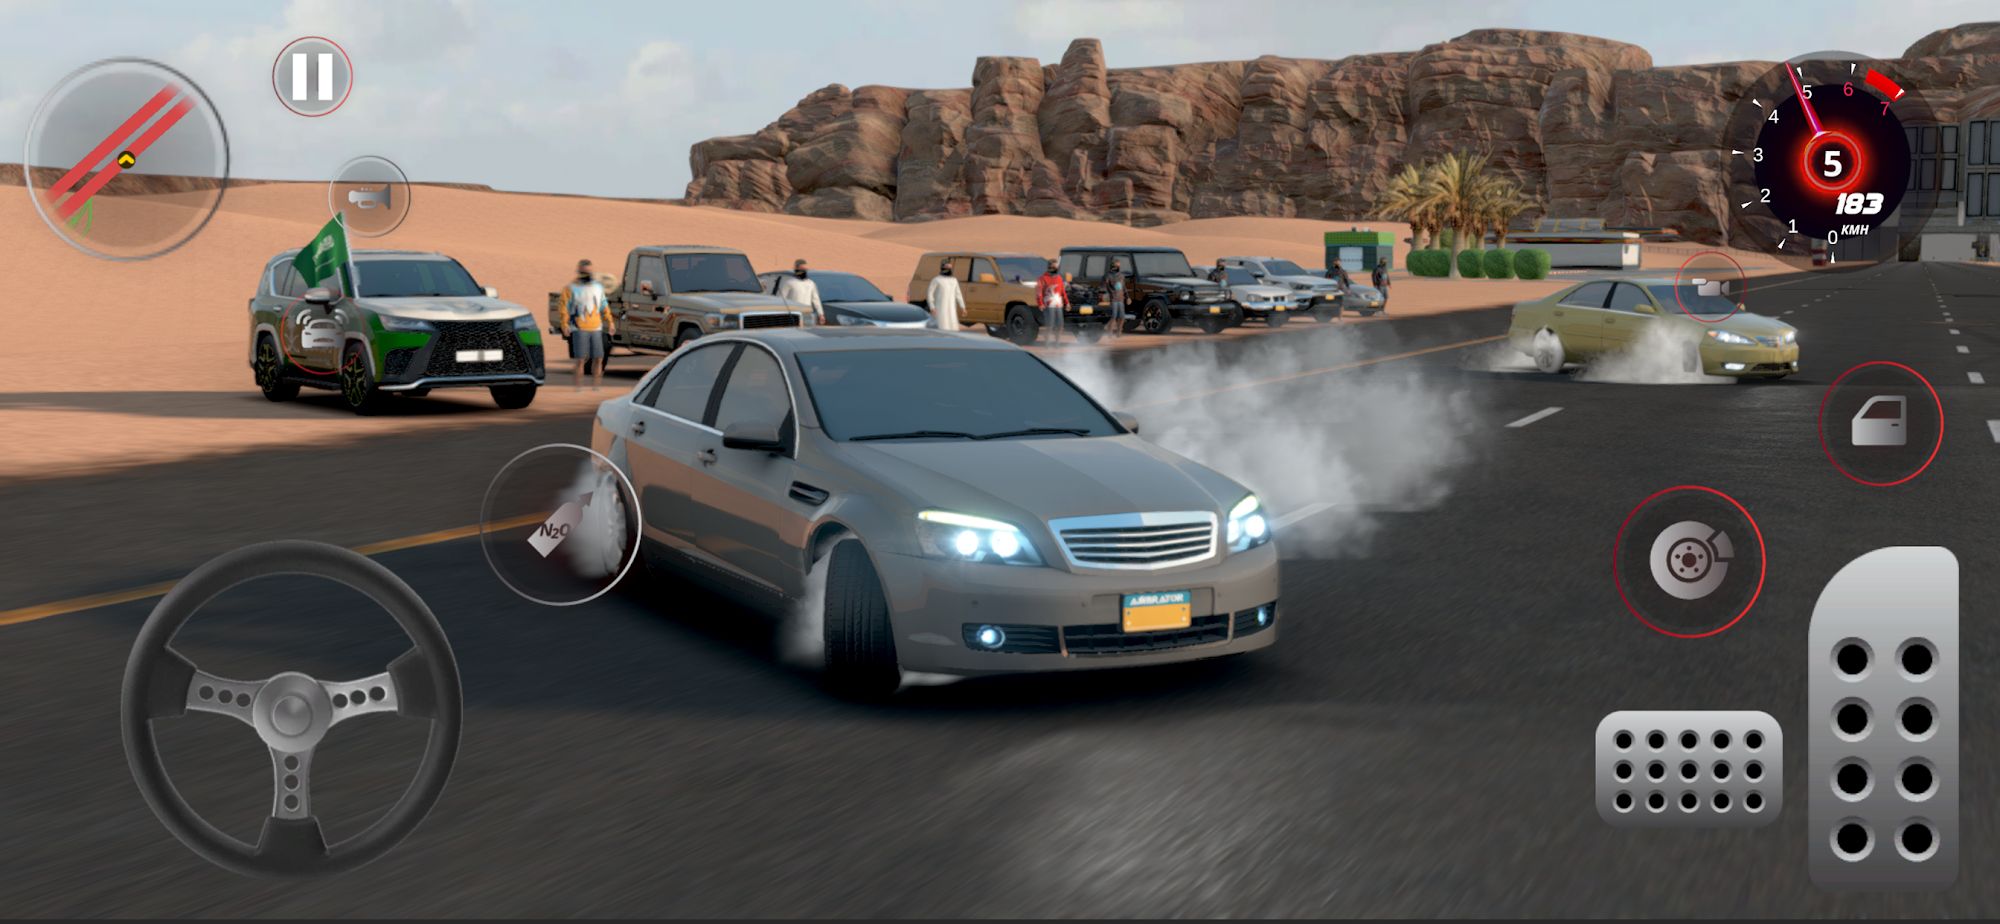 Full version of Android Racing game apk Drift for Life for tablet and phone.